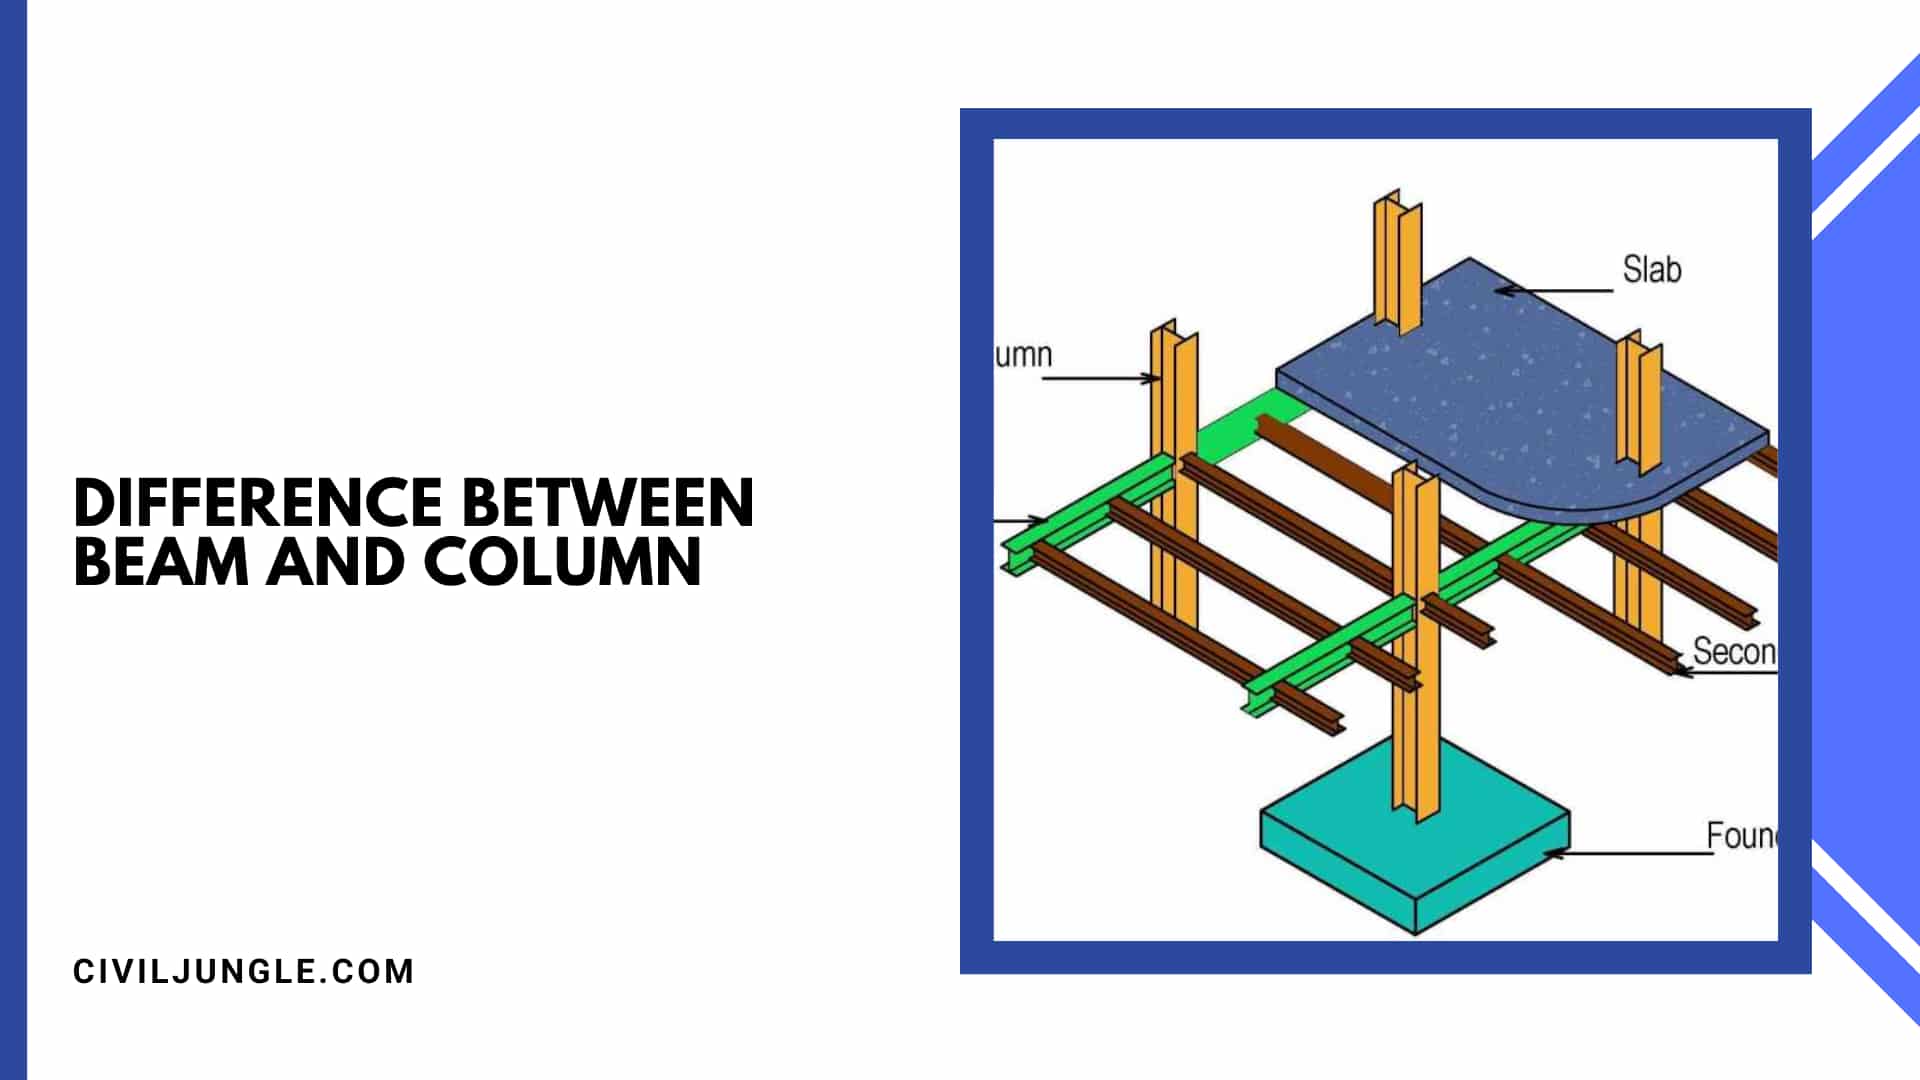 Difference Between Beam and Column